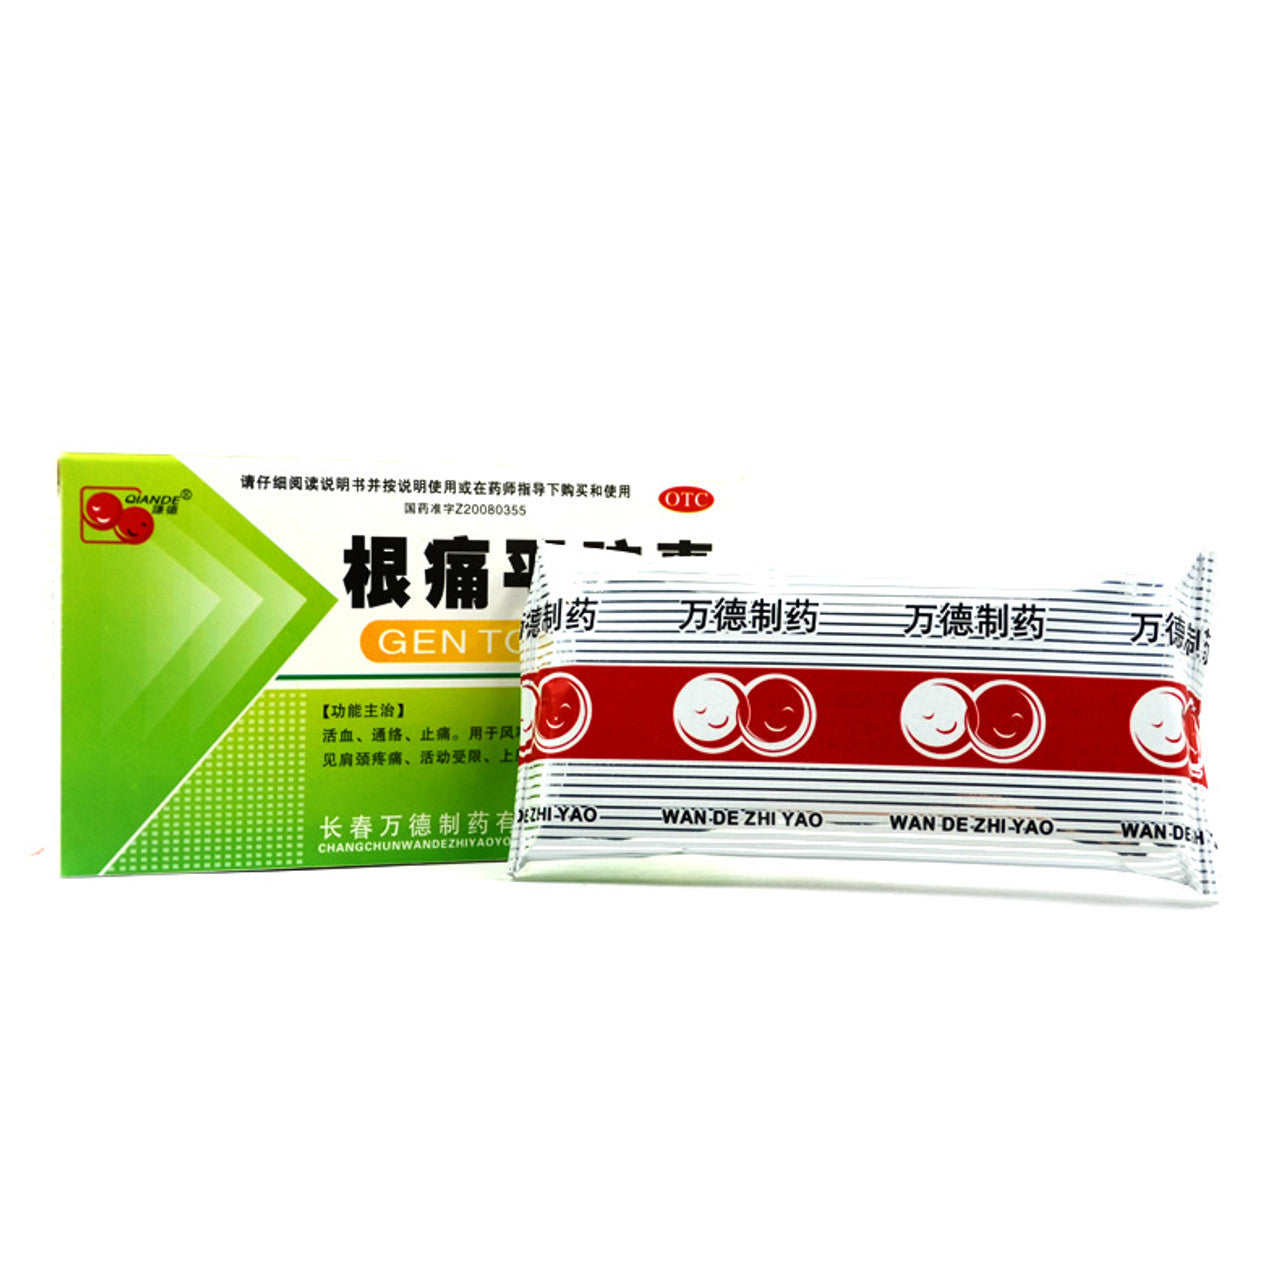 Chinese Herbs. Brand QIANDE. GEN TONG PING JIAO NANG or Gentongping Jiaonang or Gentongping Capsules or Gen Tong Ping Capsules For cervical and lumbar spondylosis caused by wind-cold blockage